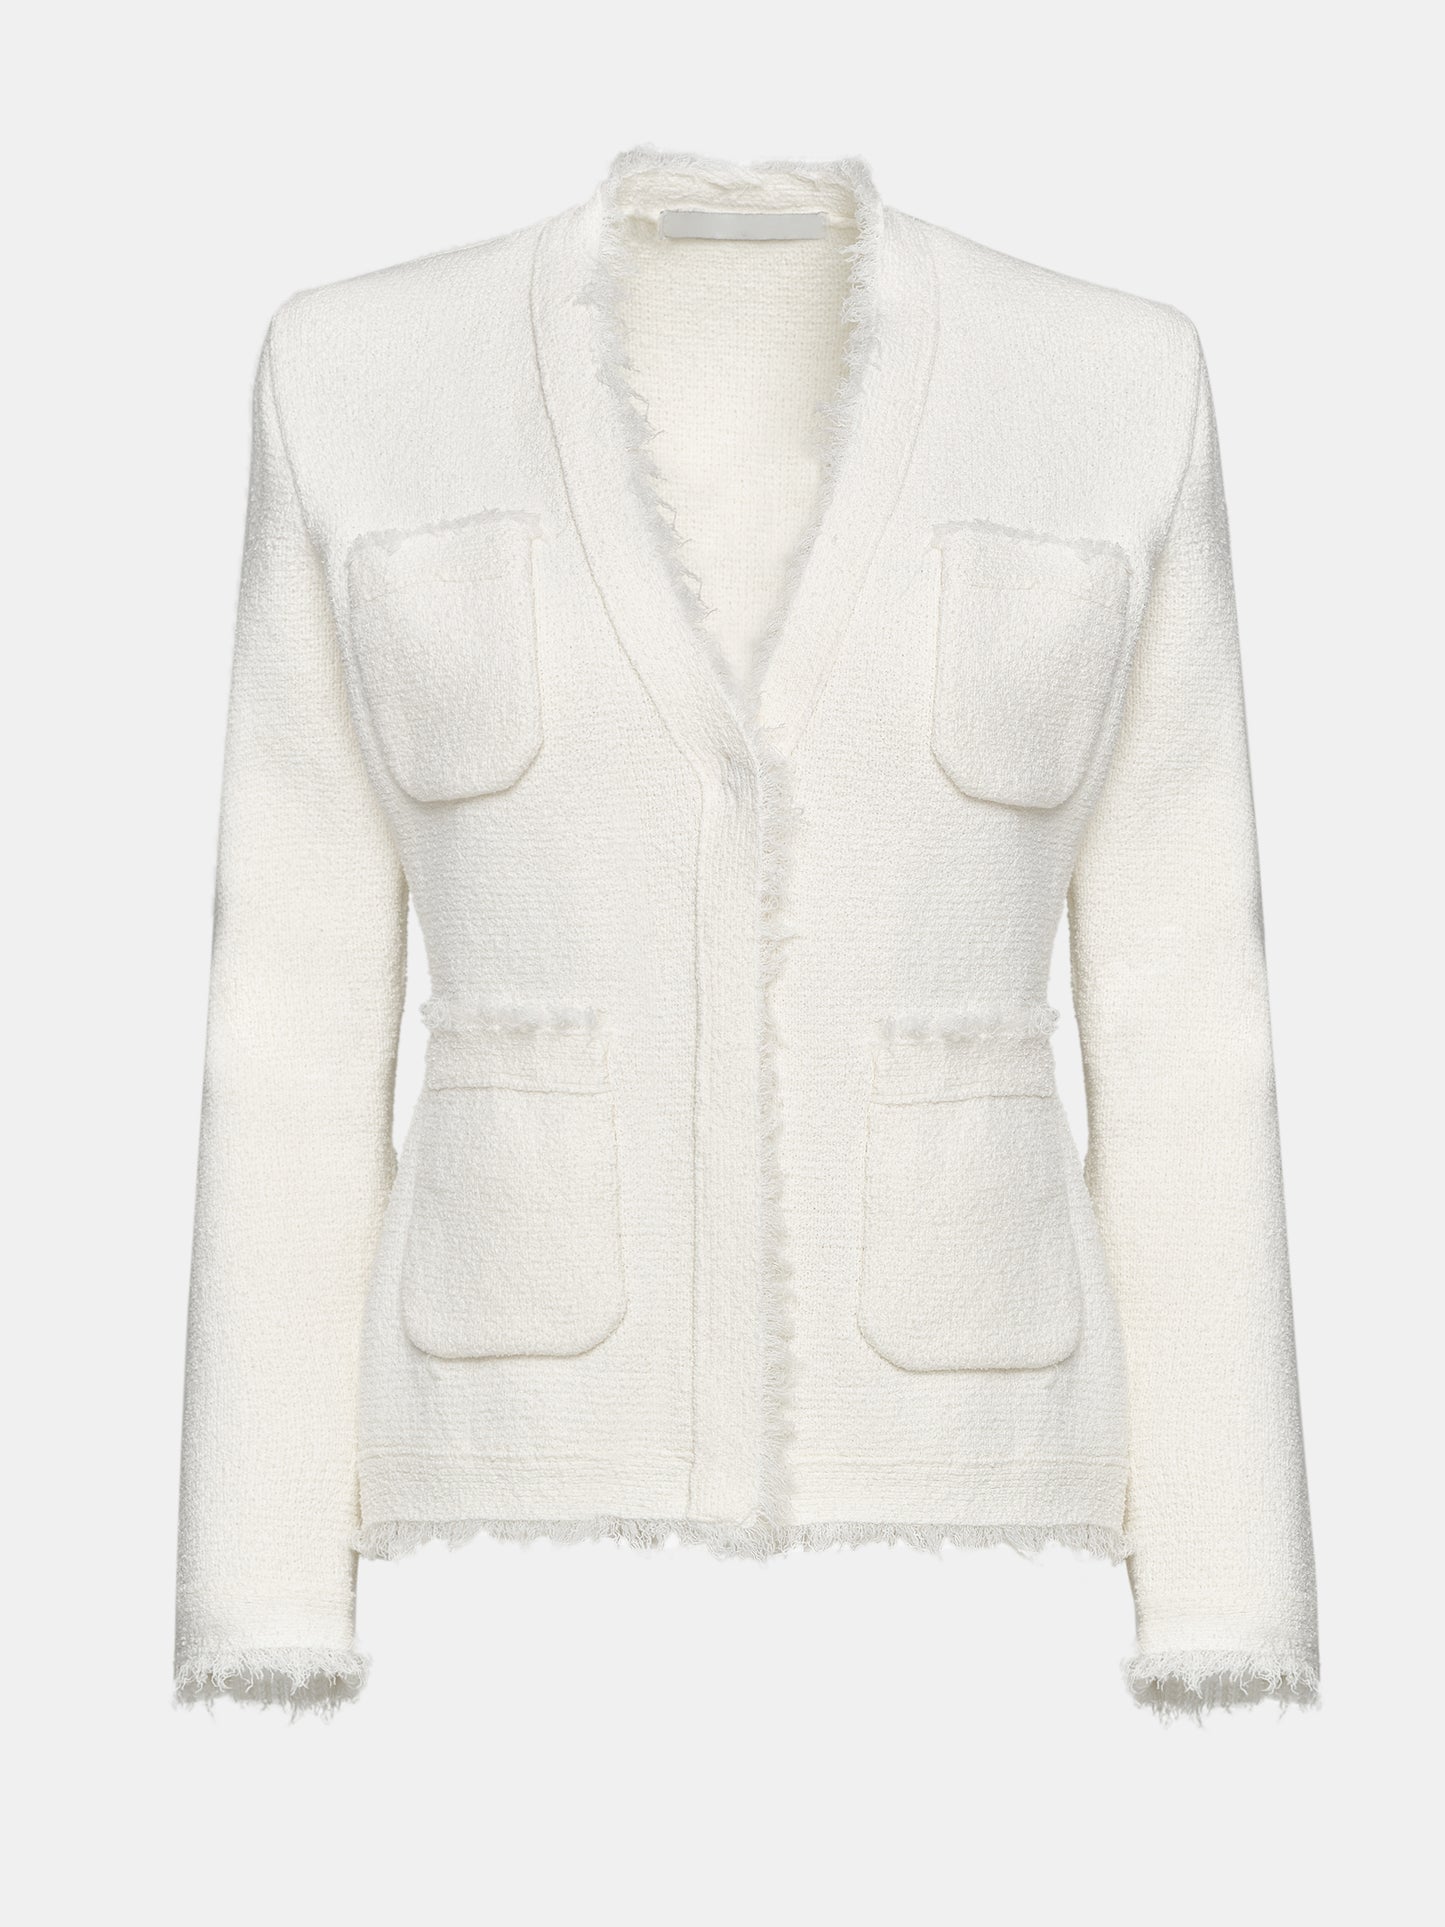 Cinched Waist Cardigan, Natural White